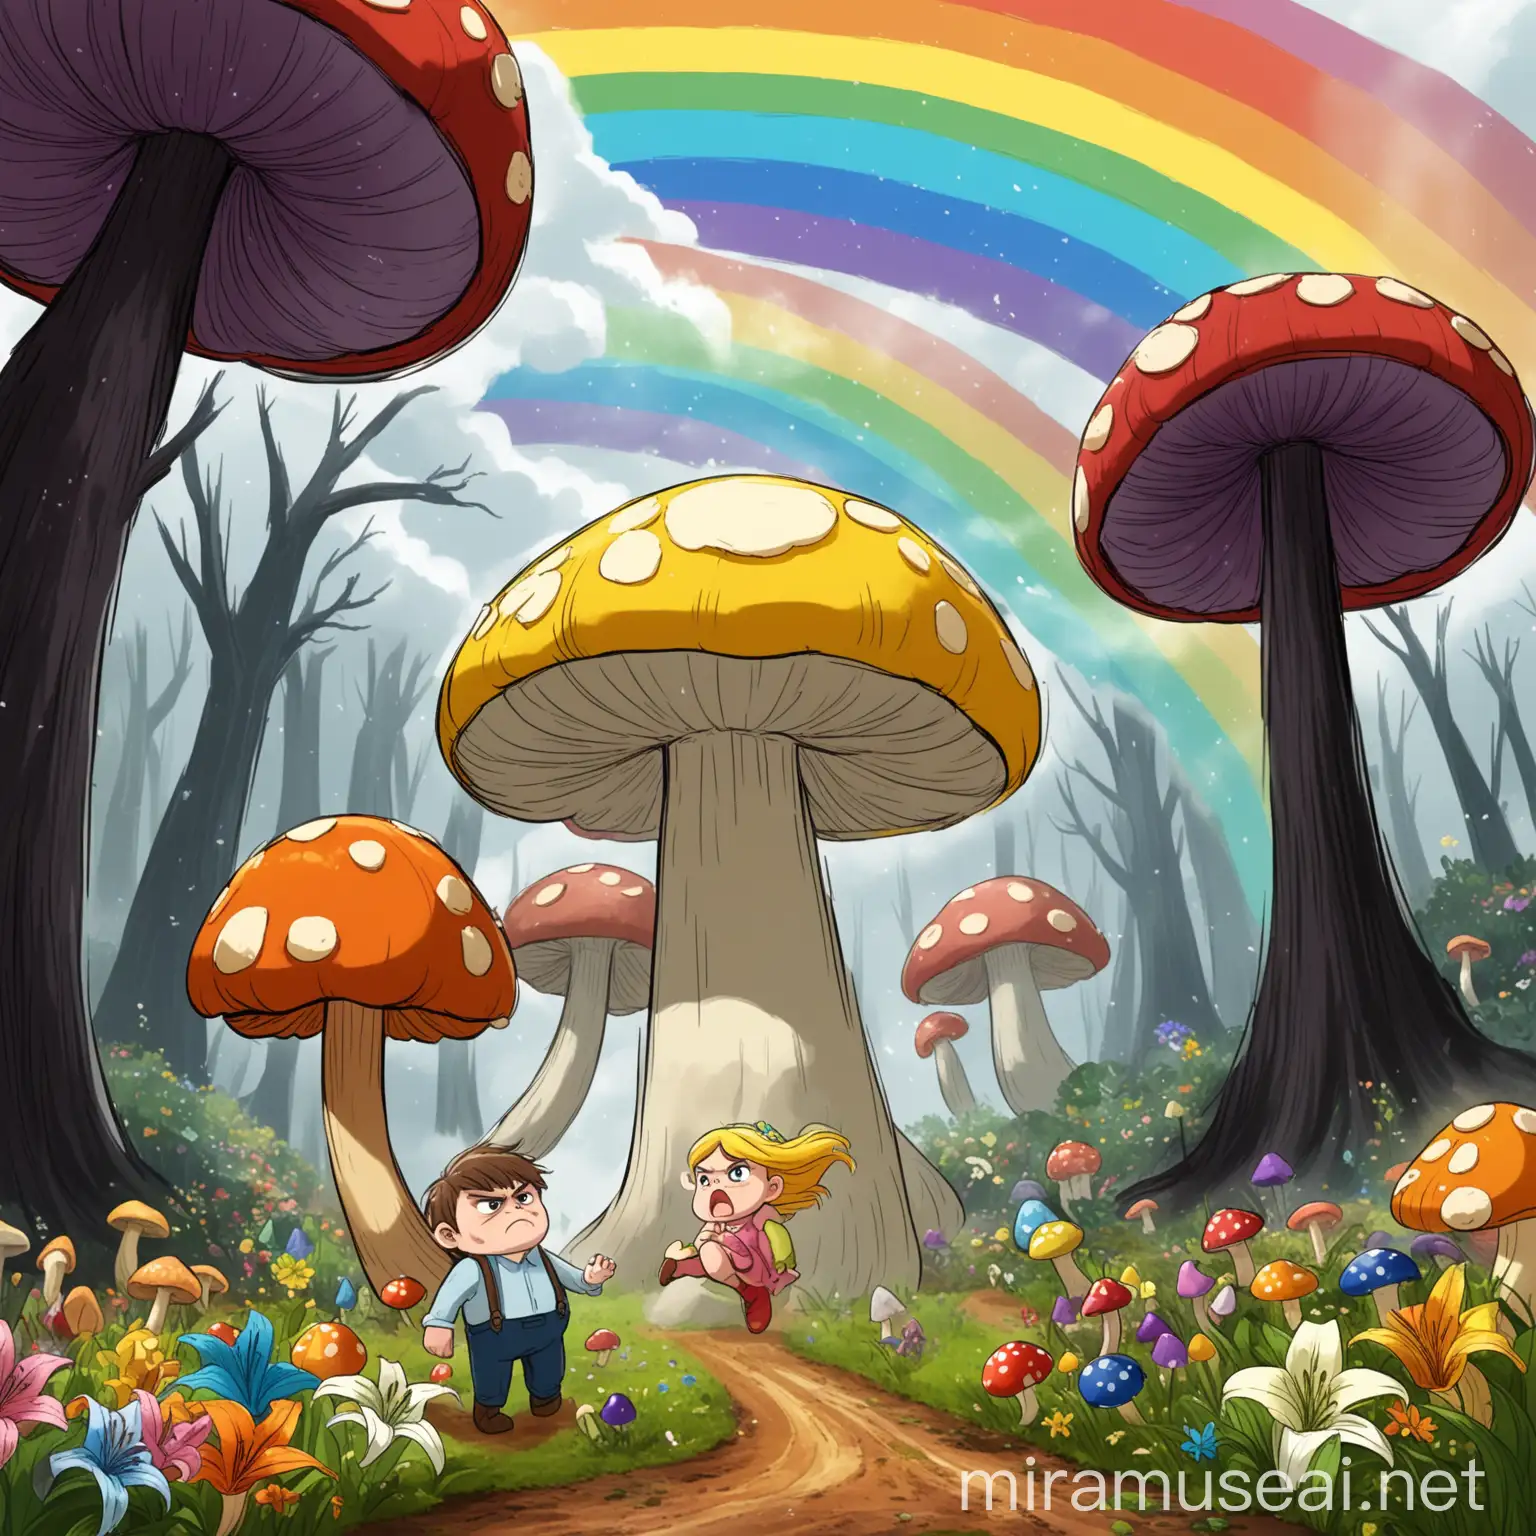 Lily and Arthur tumbled out of a rainbow swirl, landing with a plop! No more giant flowers. Now, dark trees and giant mushrooms loomed around them. Grumpy sounds filled the air.

